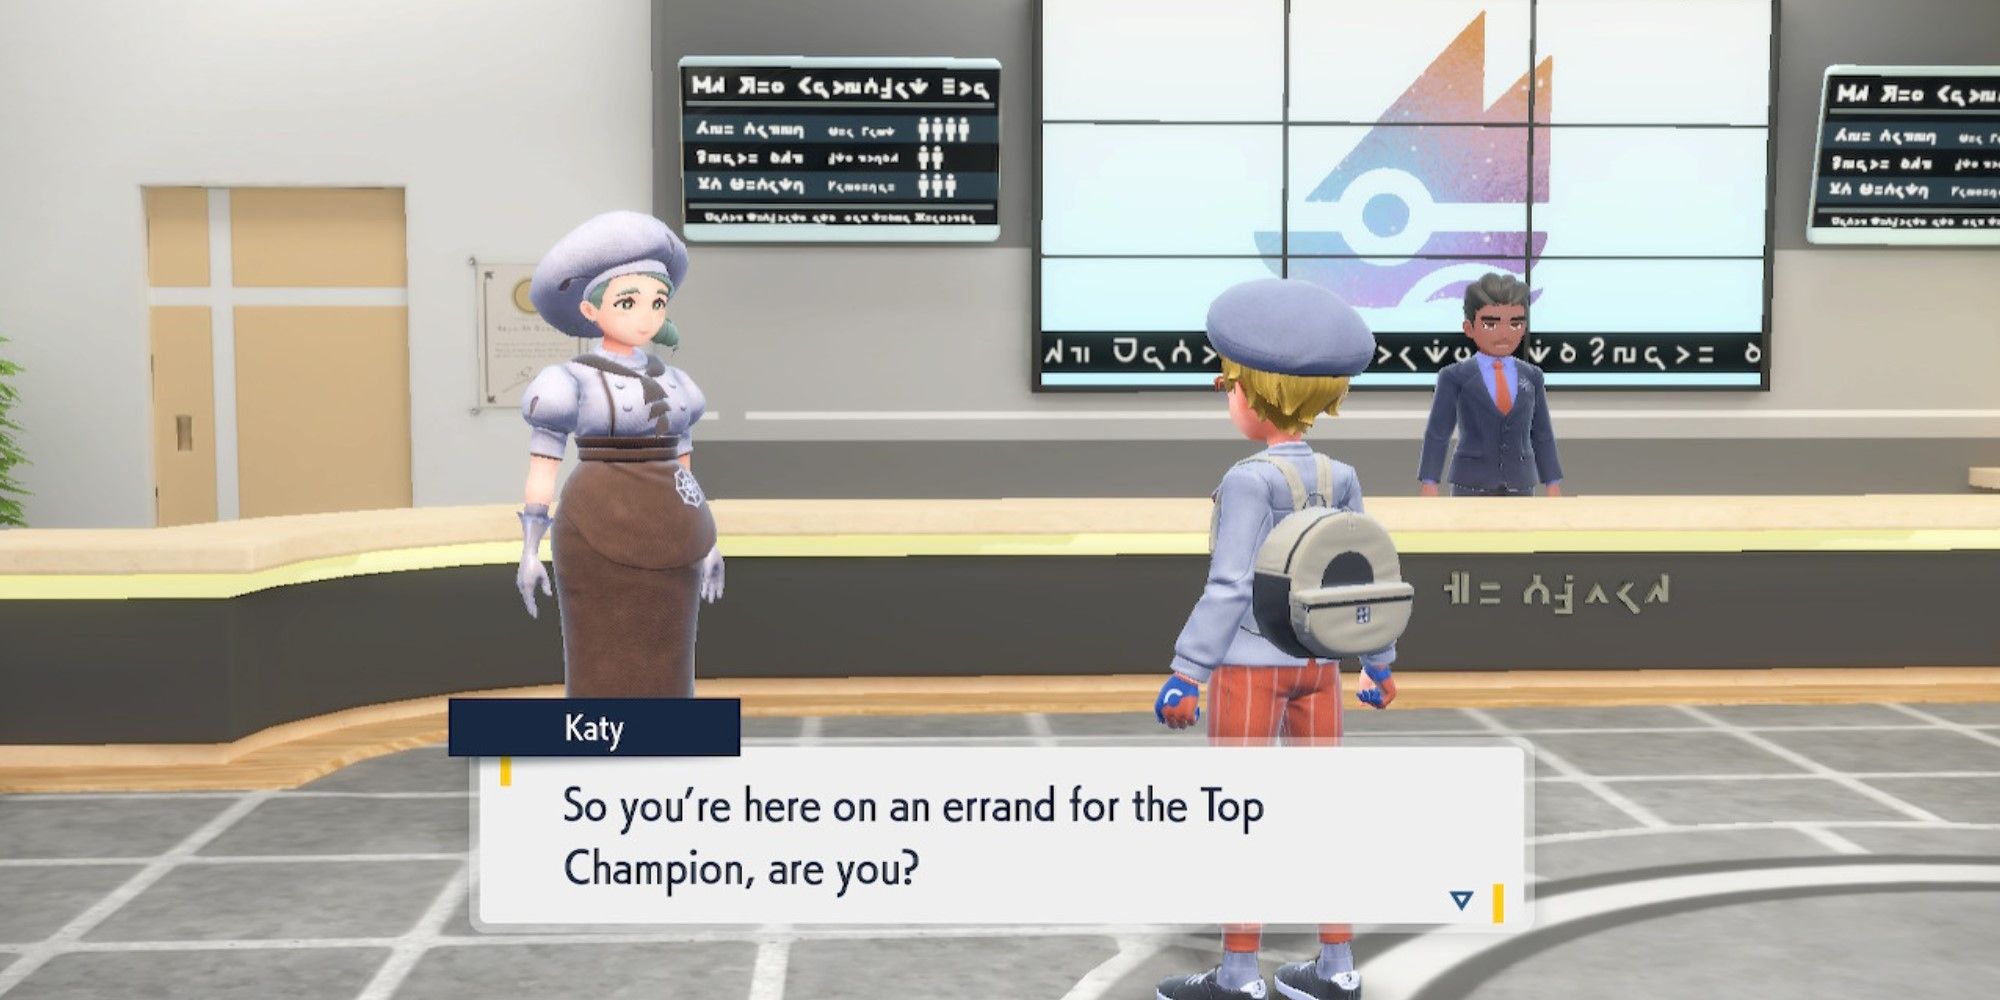 Pokemon Scarlet And Violet Gym Leader Katy asking about an errand the player is doing for the Top Champion